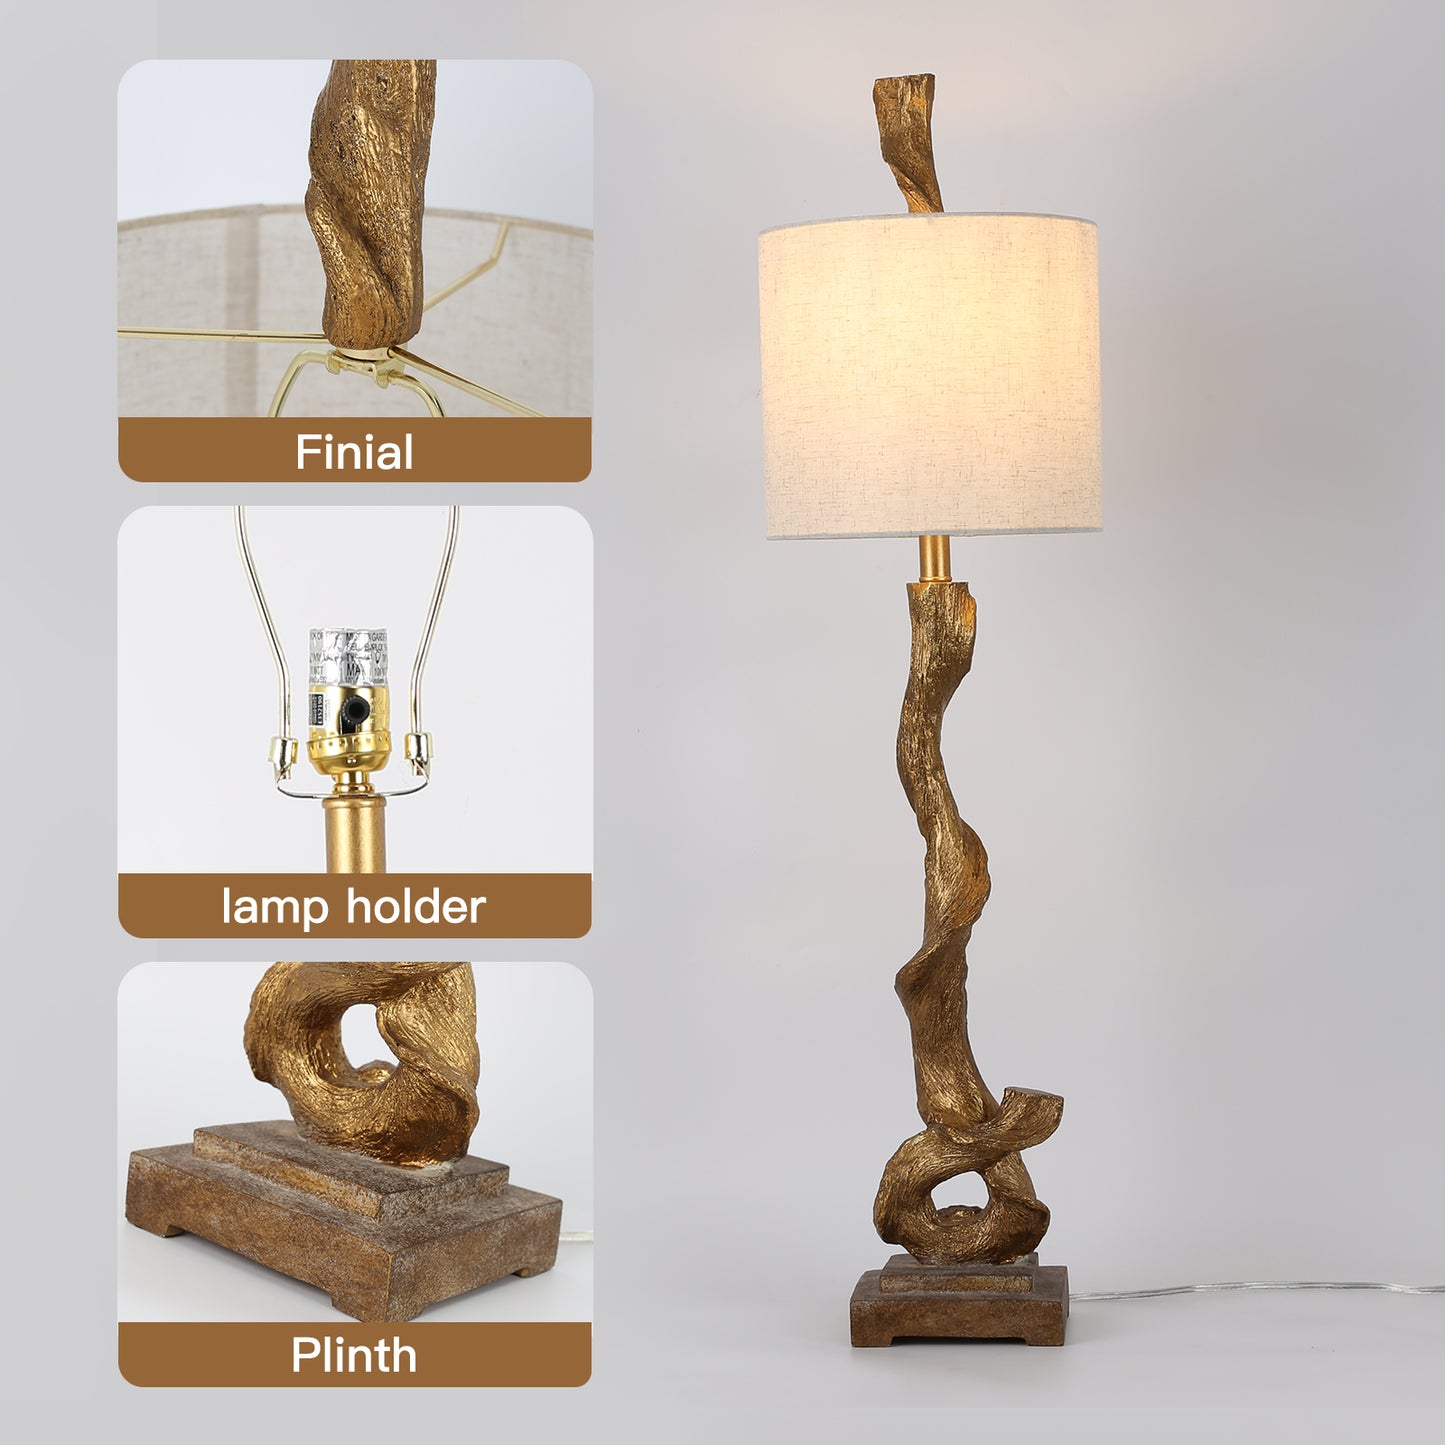 Breba 42" Vintage Style Gold Wood Color Table Lamp